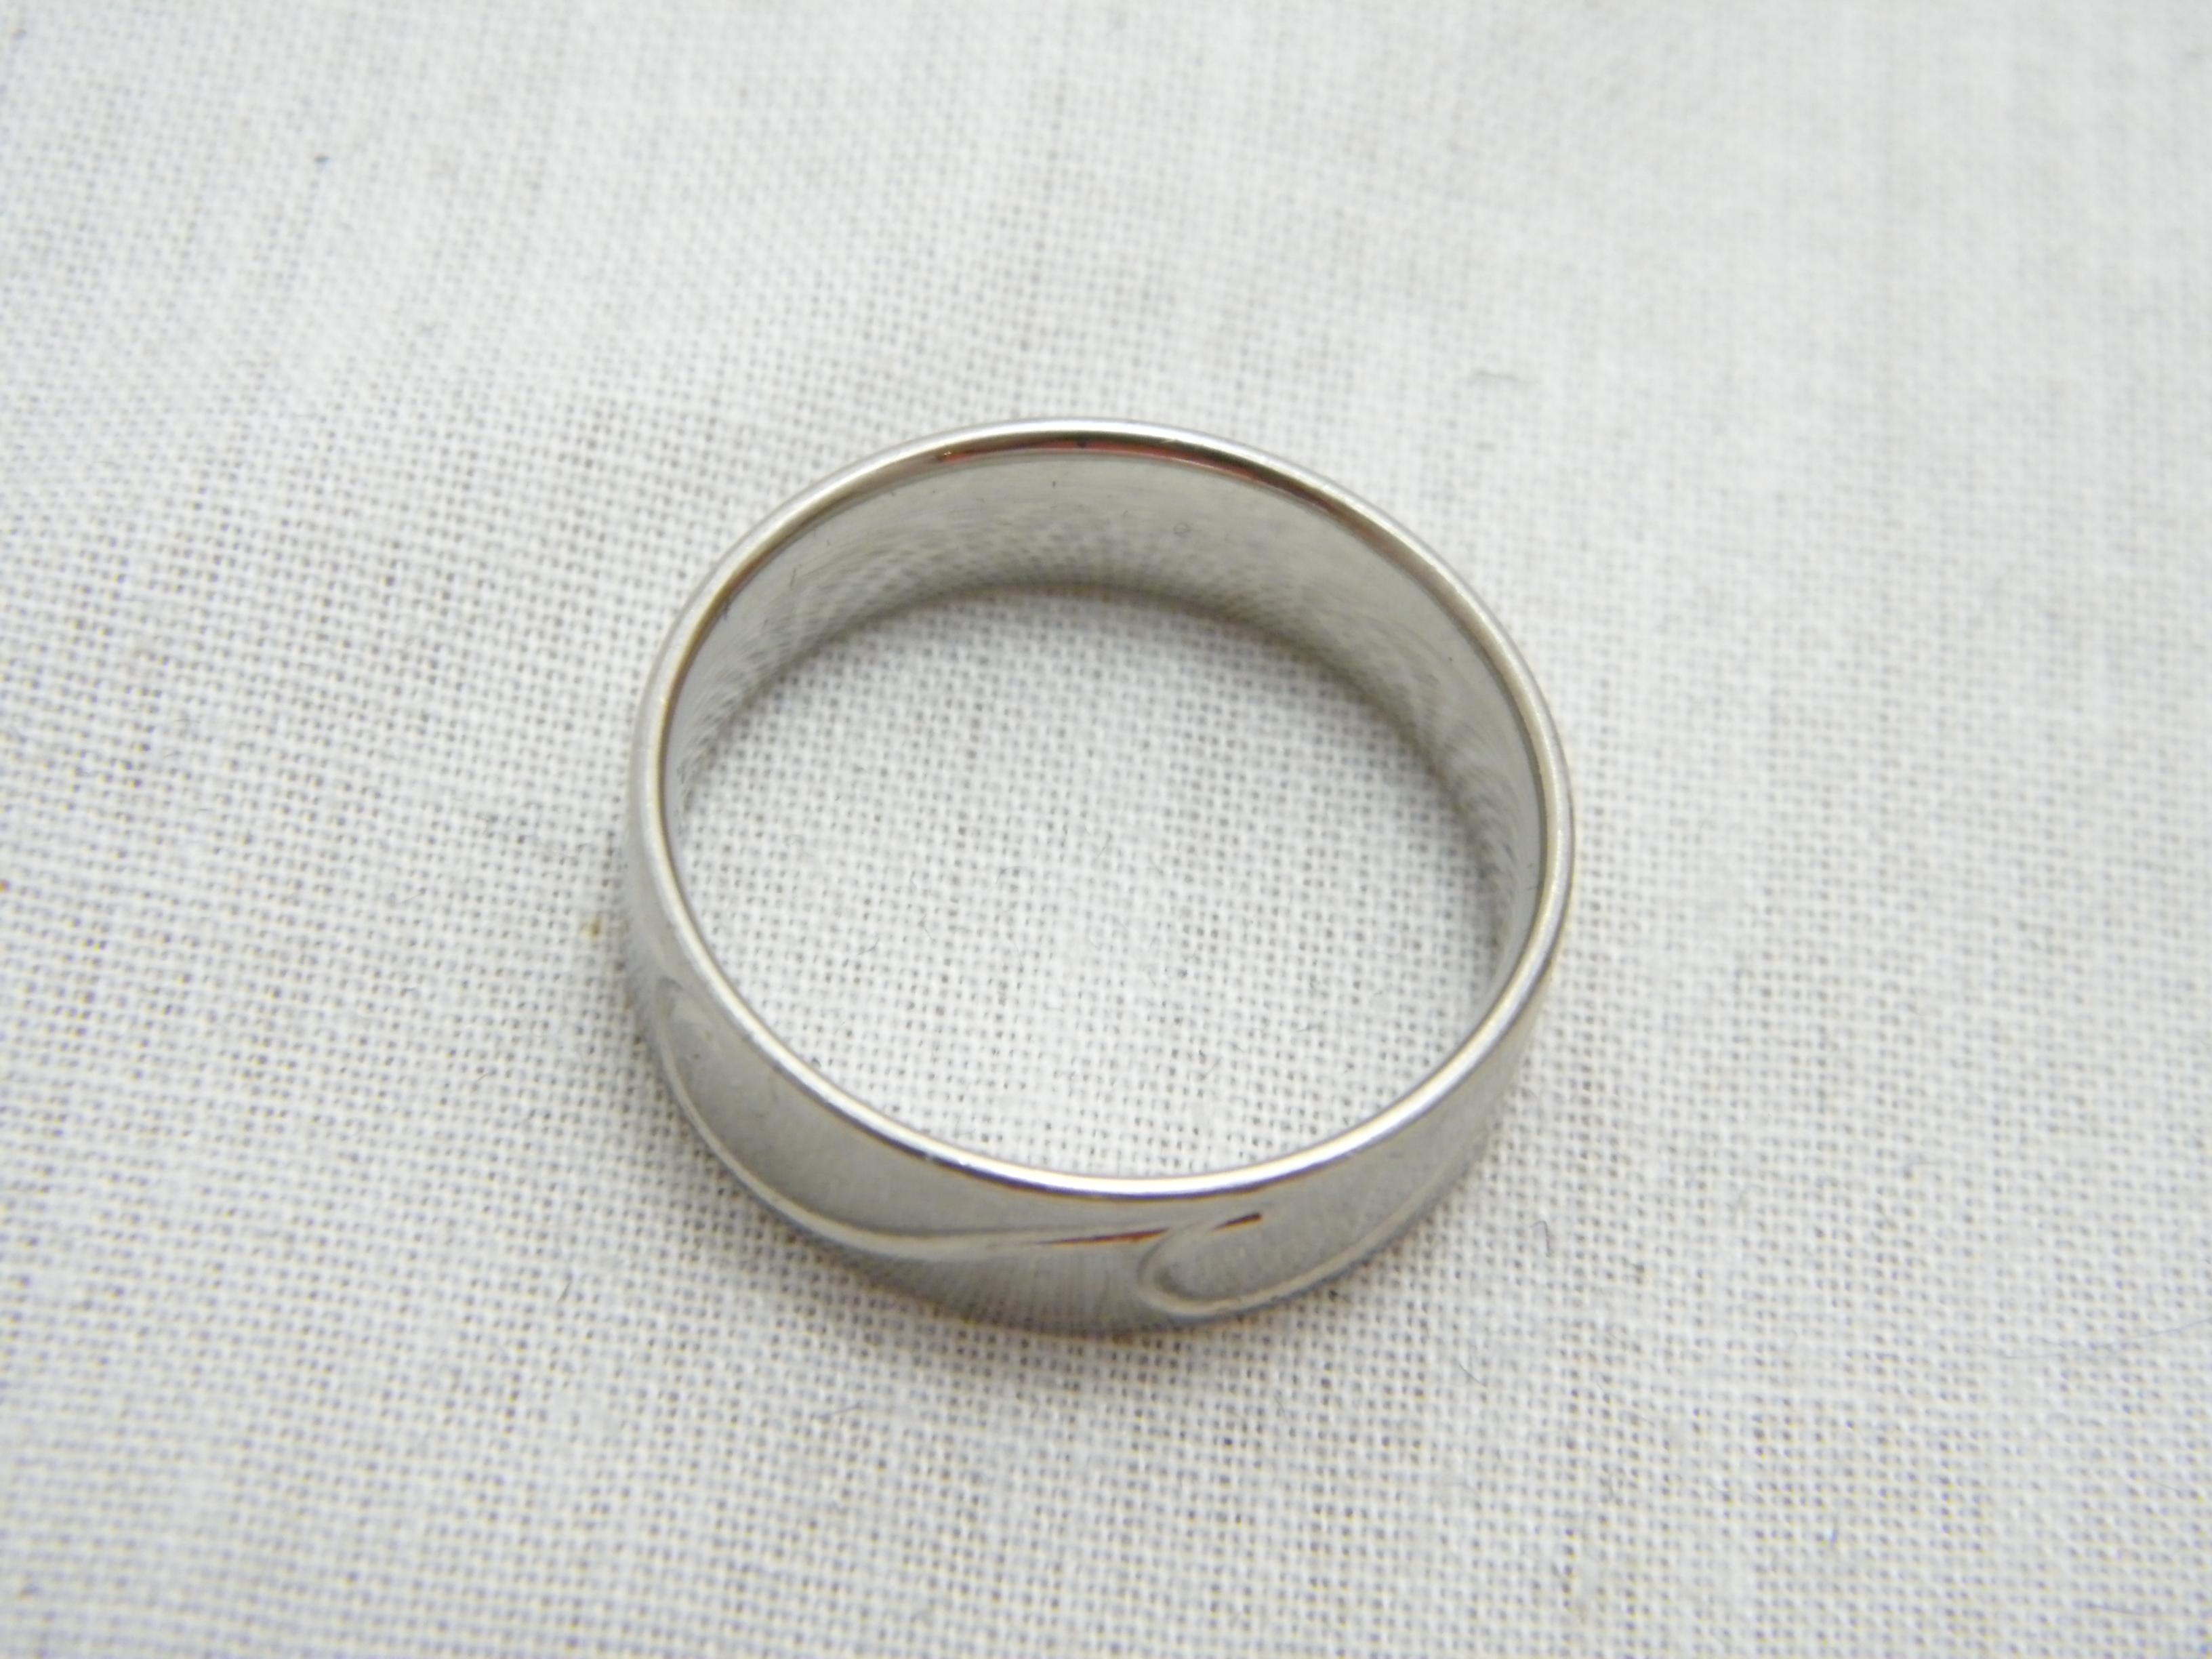 Vintage Tiffany Palladium 6.2mm Wave Ring Size Q1/2 8.5 950 Purity Band T&Co For Sale 1